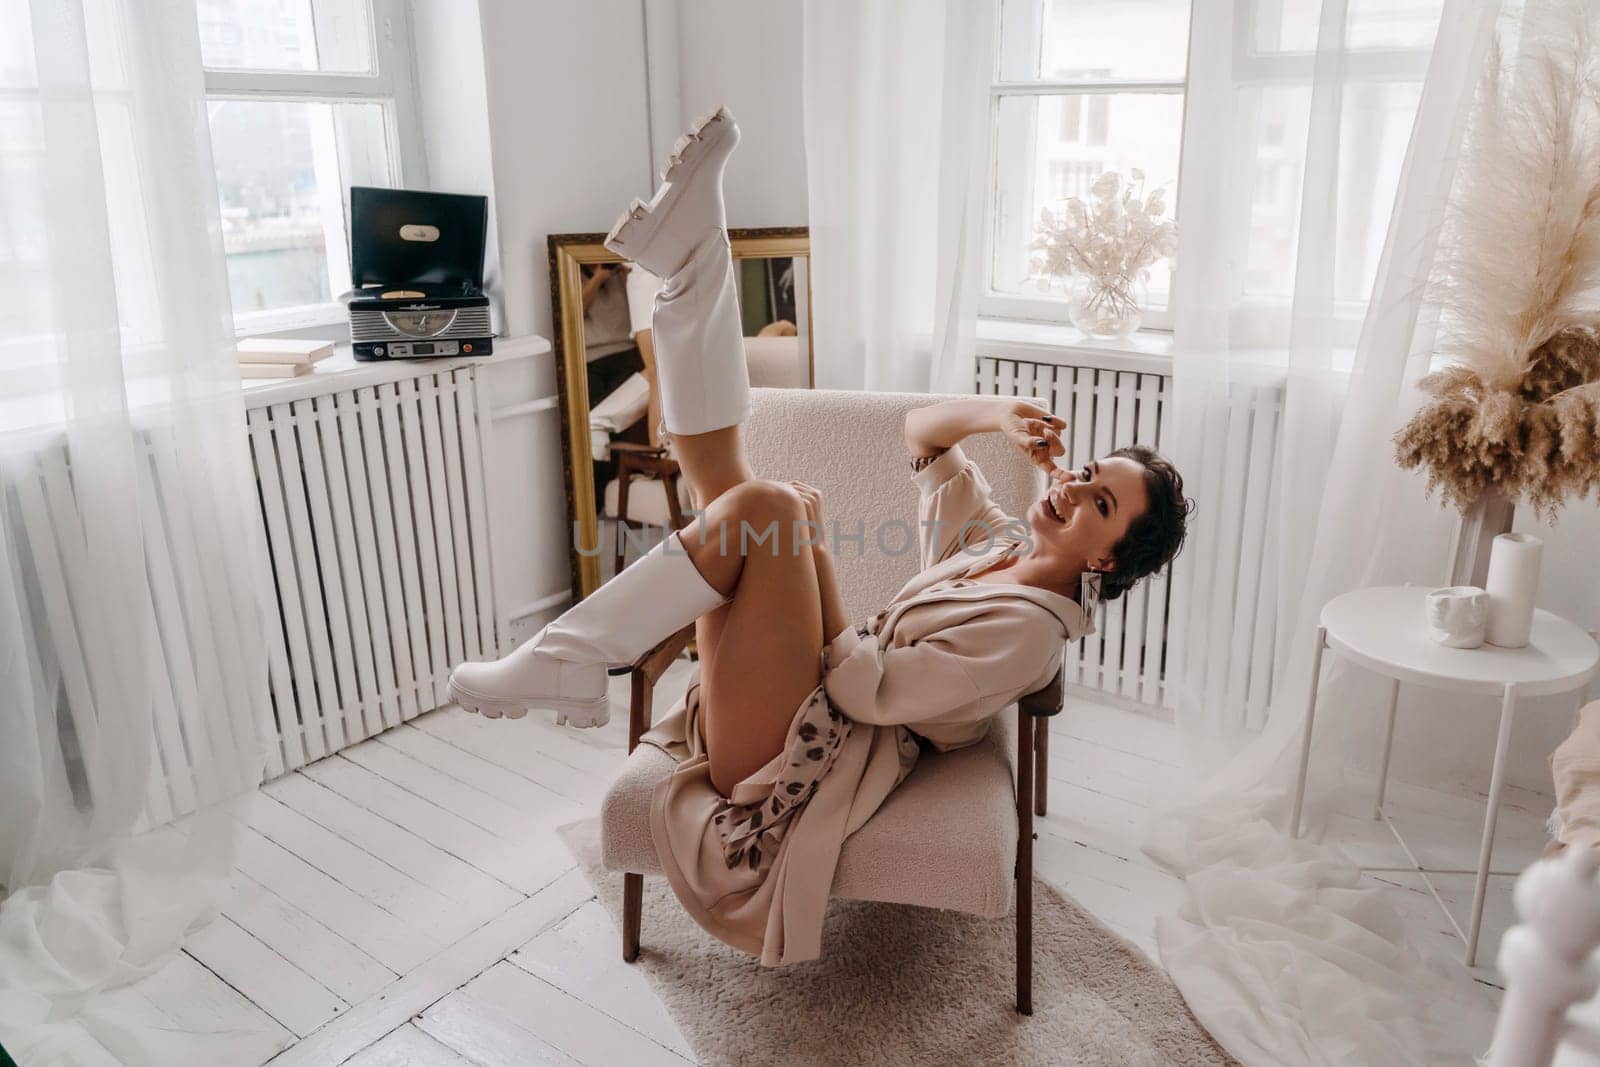 A woman is sitting in a chair with her legs spread apart. She is wearing white boots and a white dress. The room is decorated with a white color theme. by Matiunina